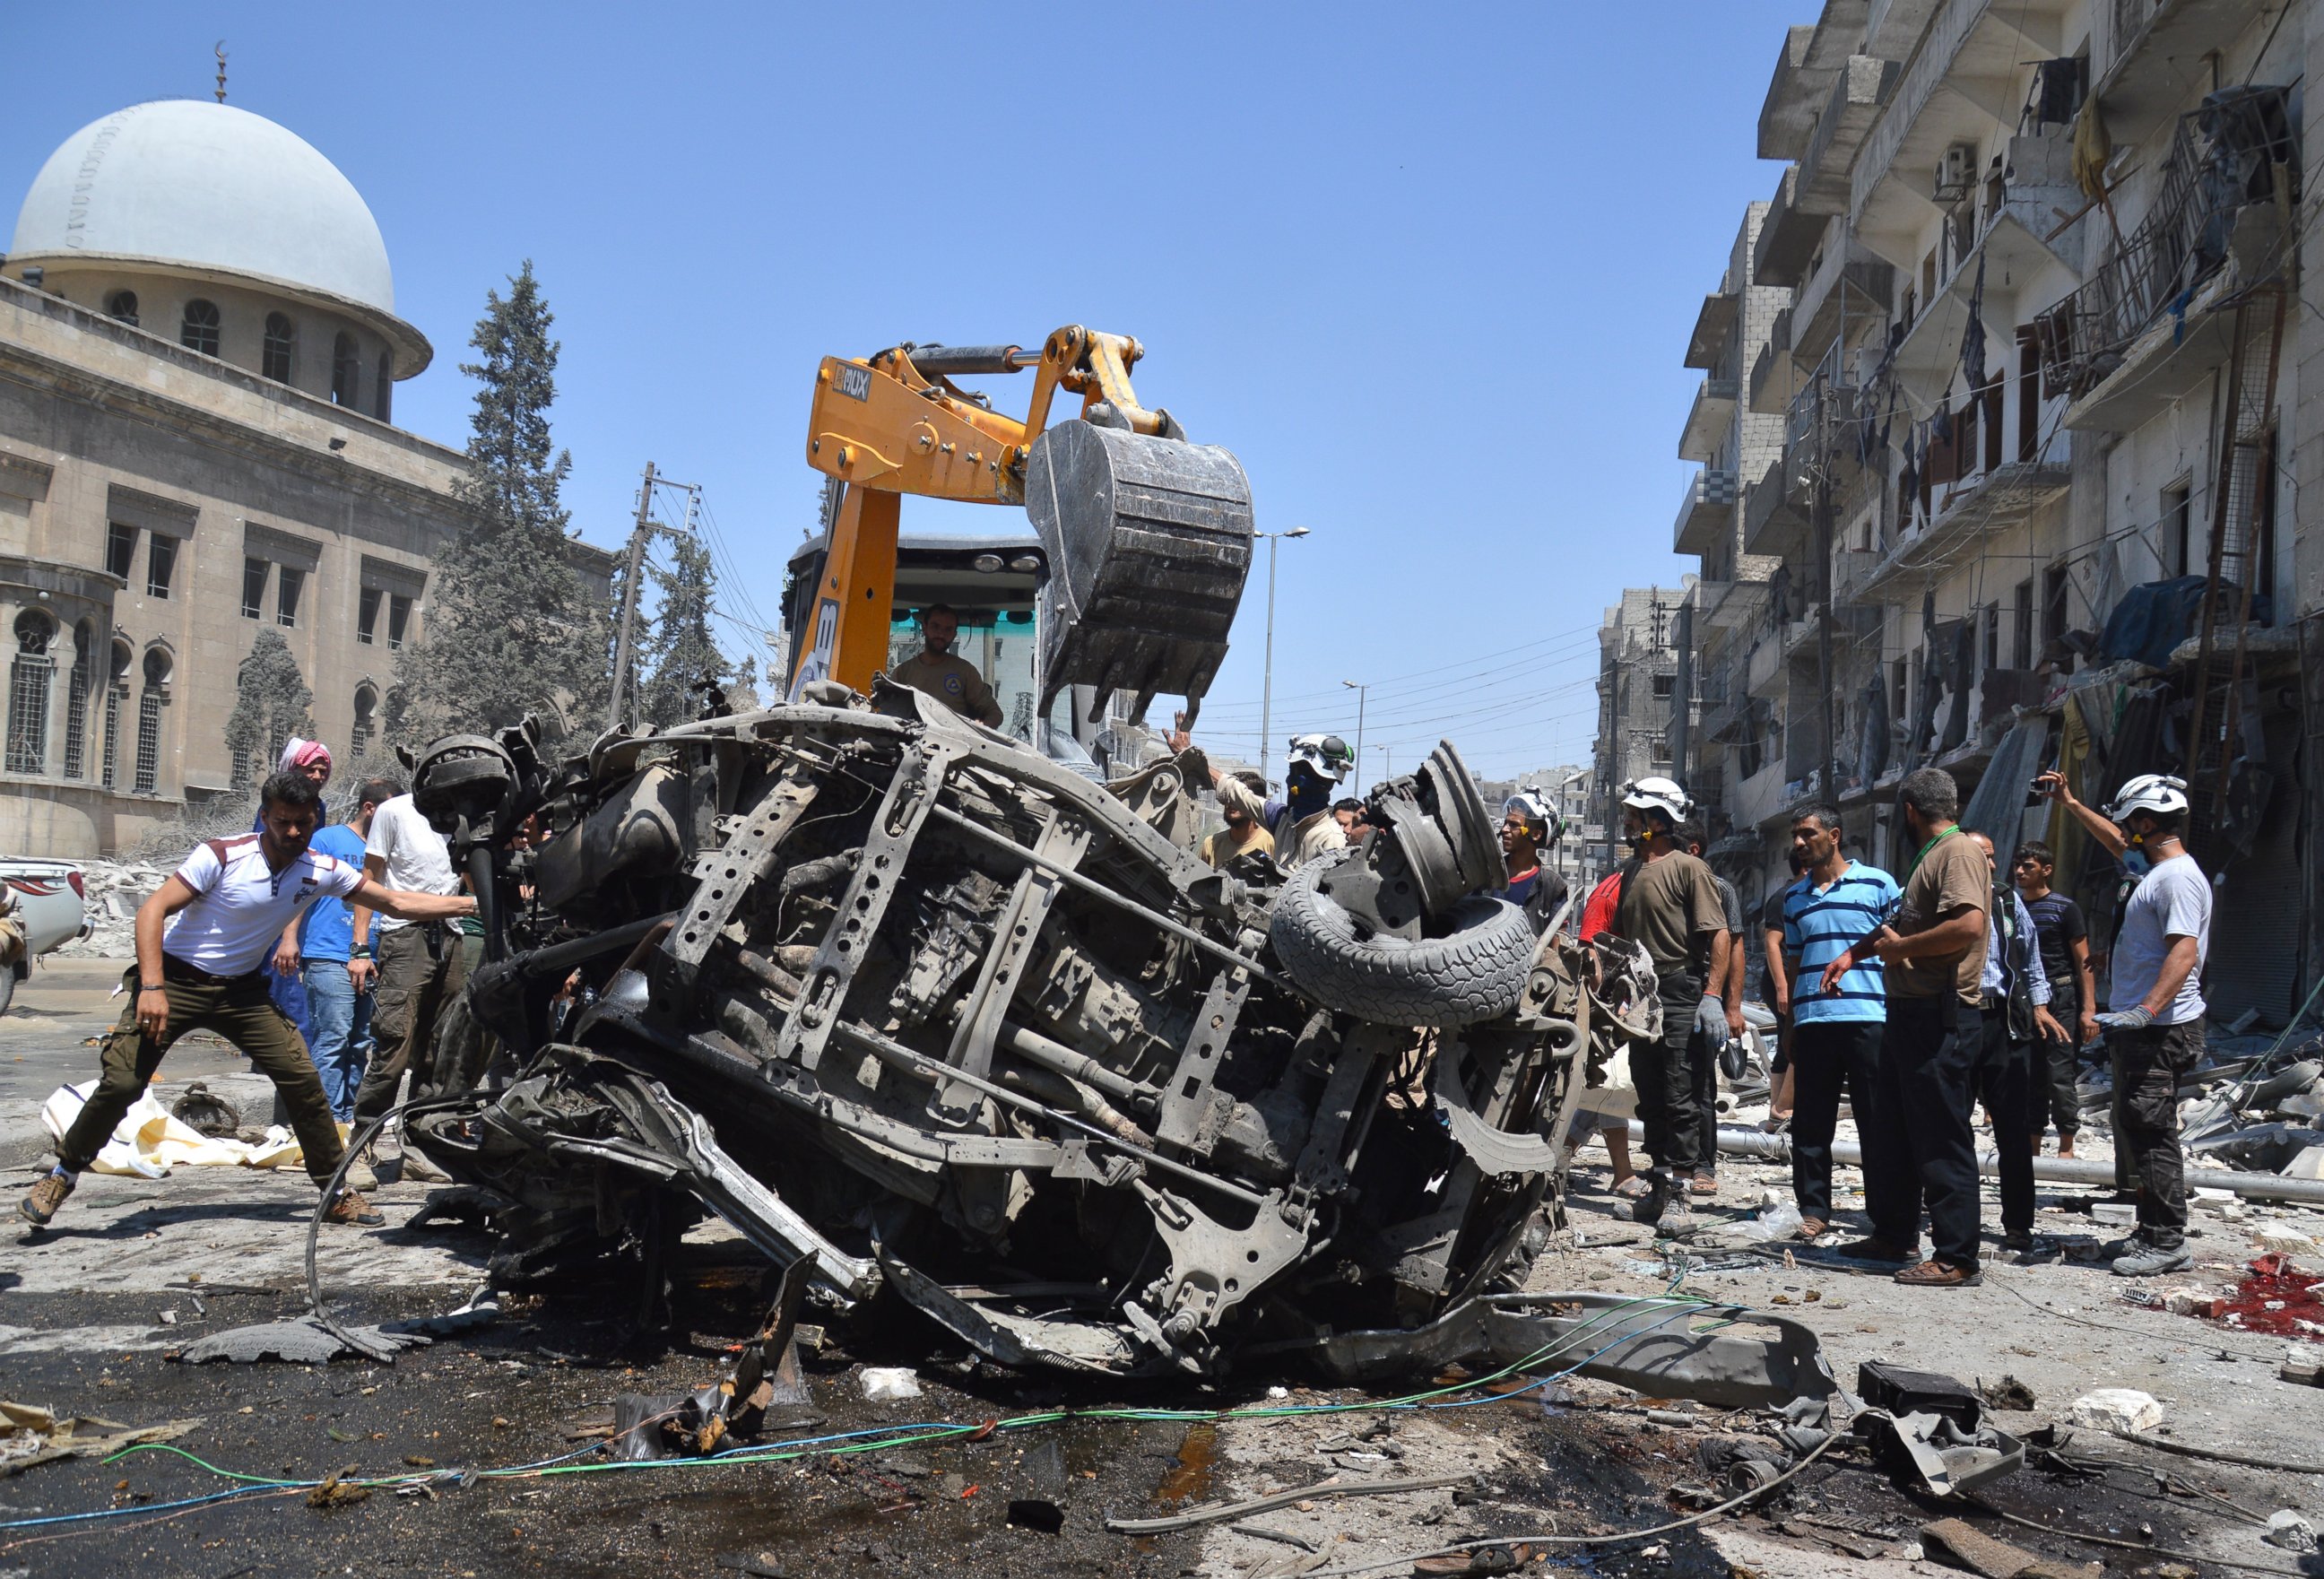 PHOTO: A damaged car is removed after Syrian and Russian warplanes targeted the Salhiyn neighborhood in Aleppo, Syria on July 21, 2016.